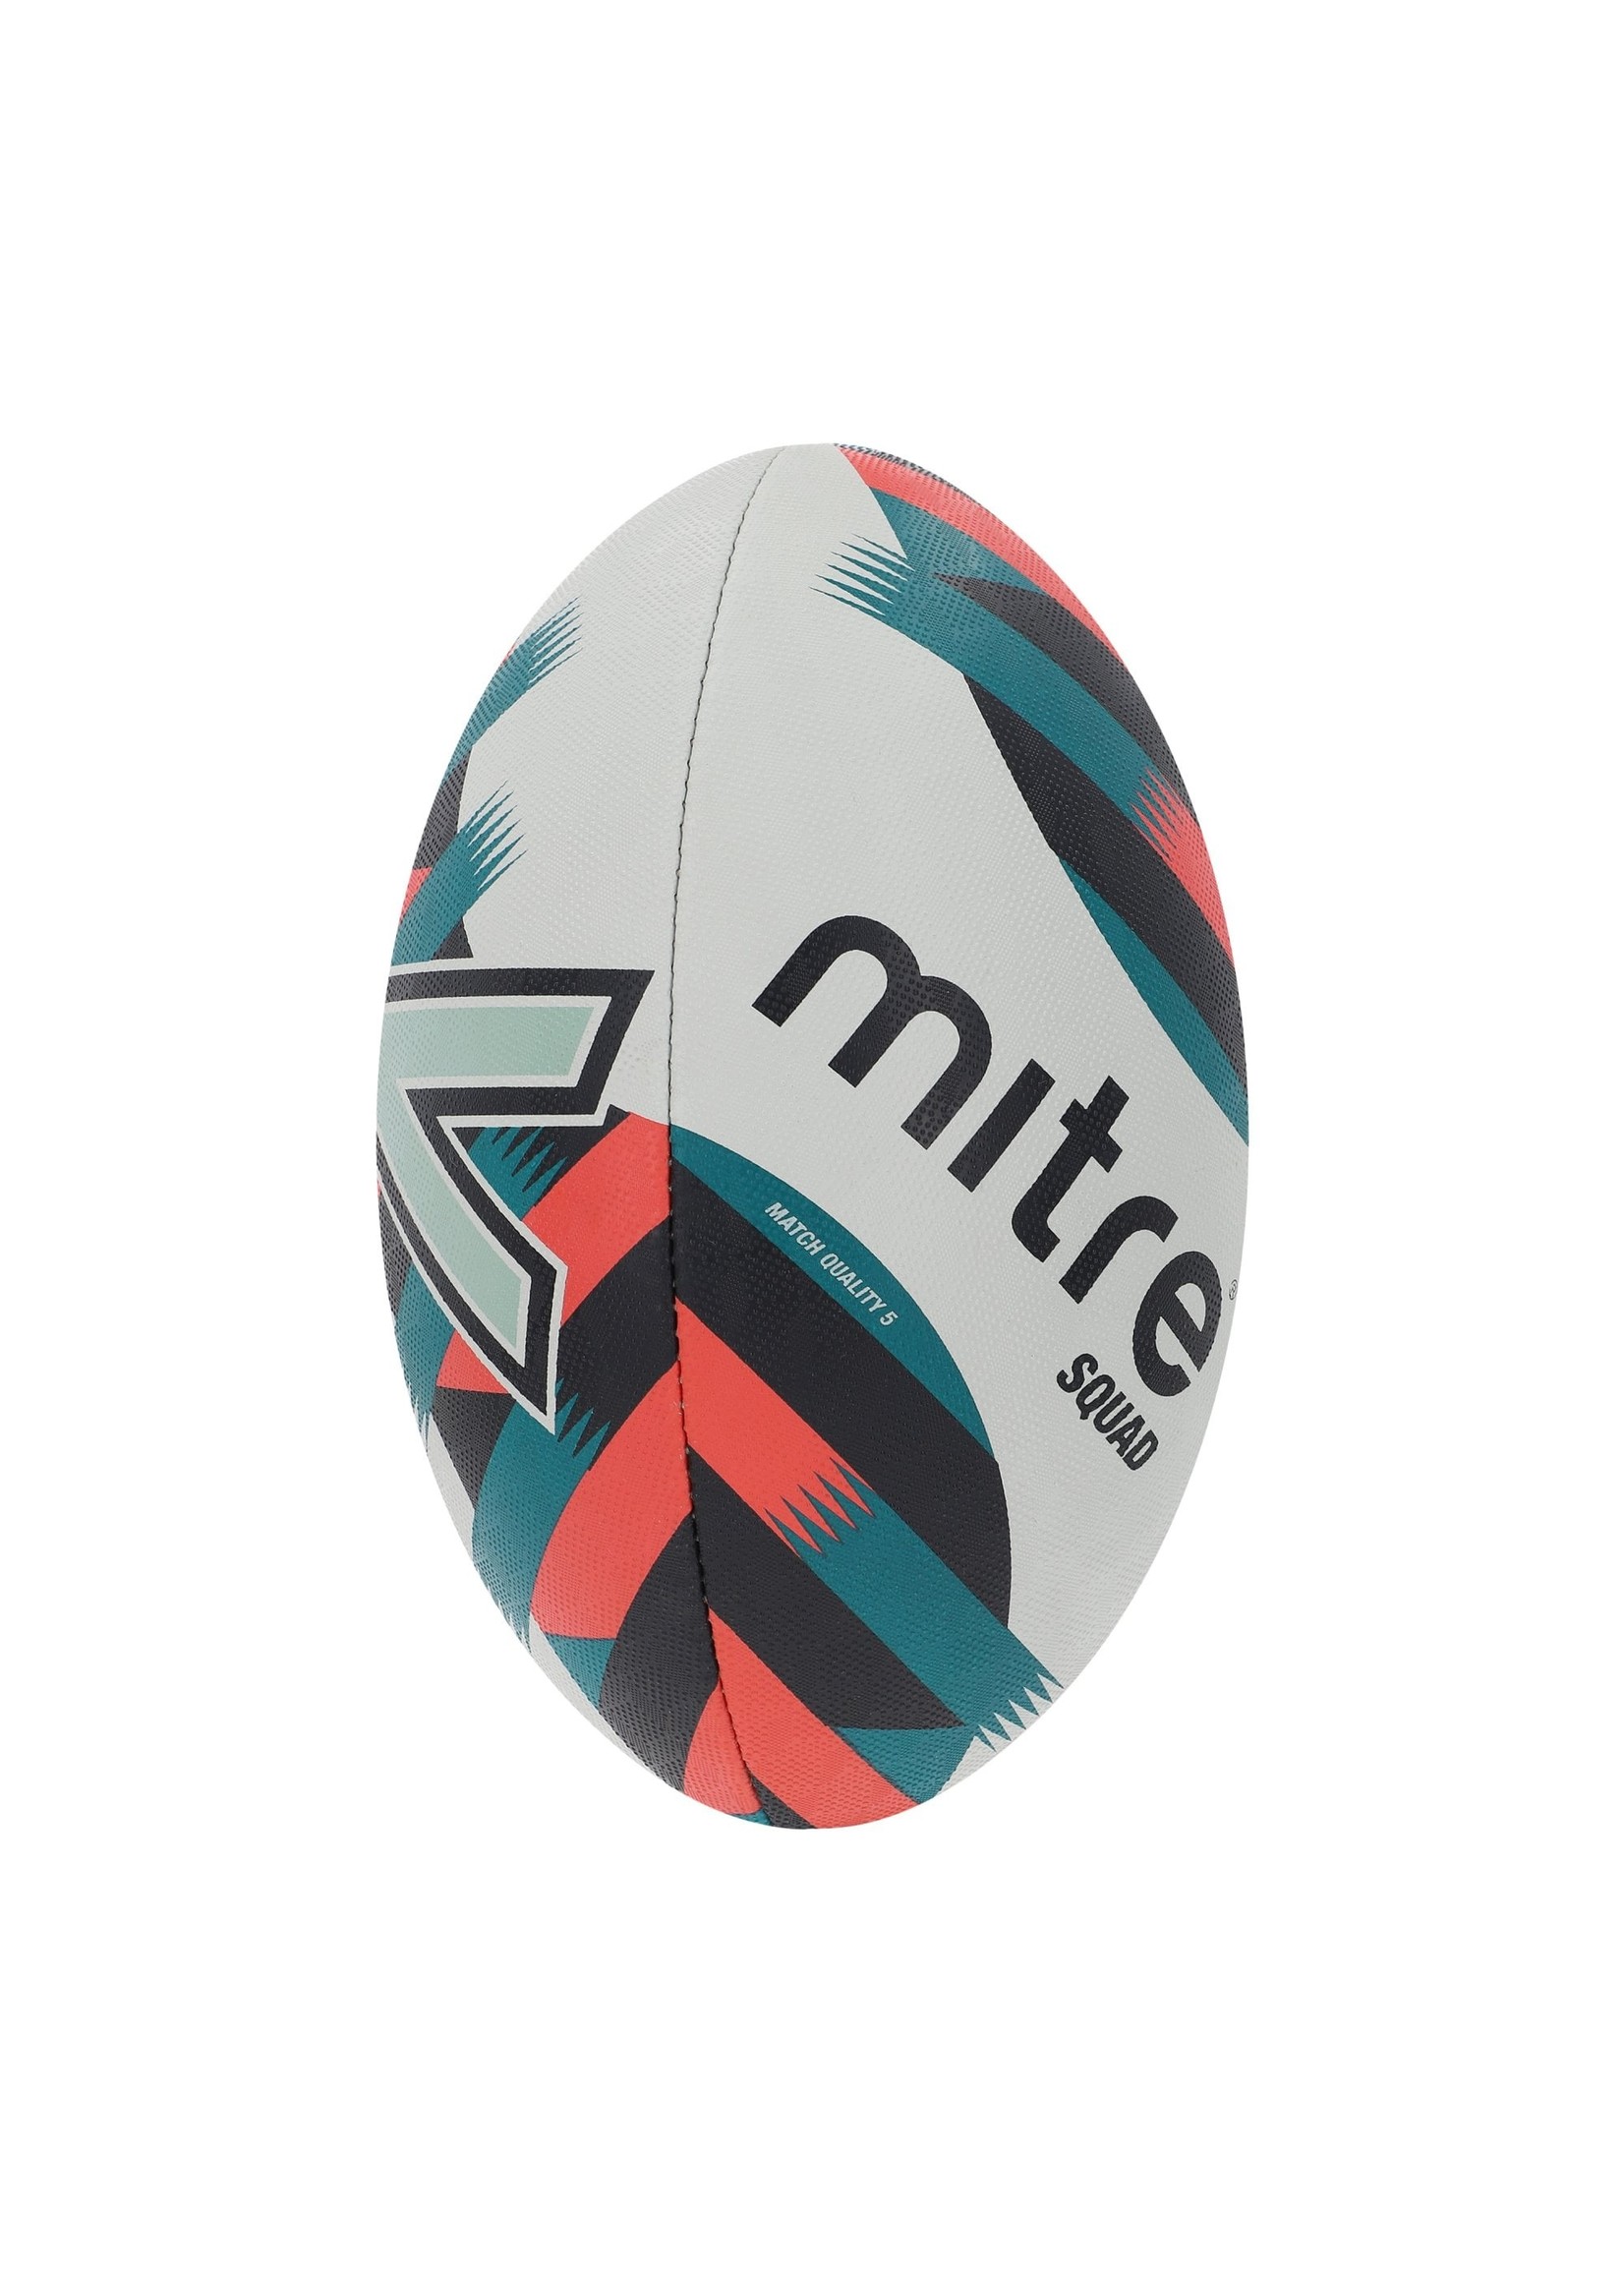 Mitre Mitre Squad Rugby Ball, Green/Orange